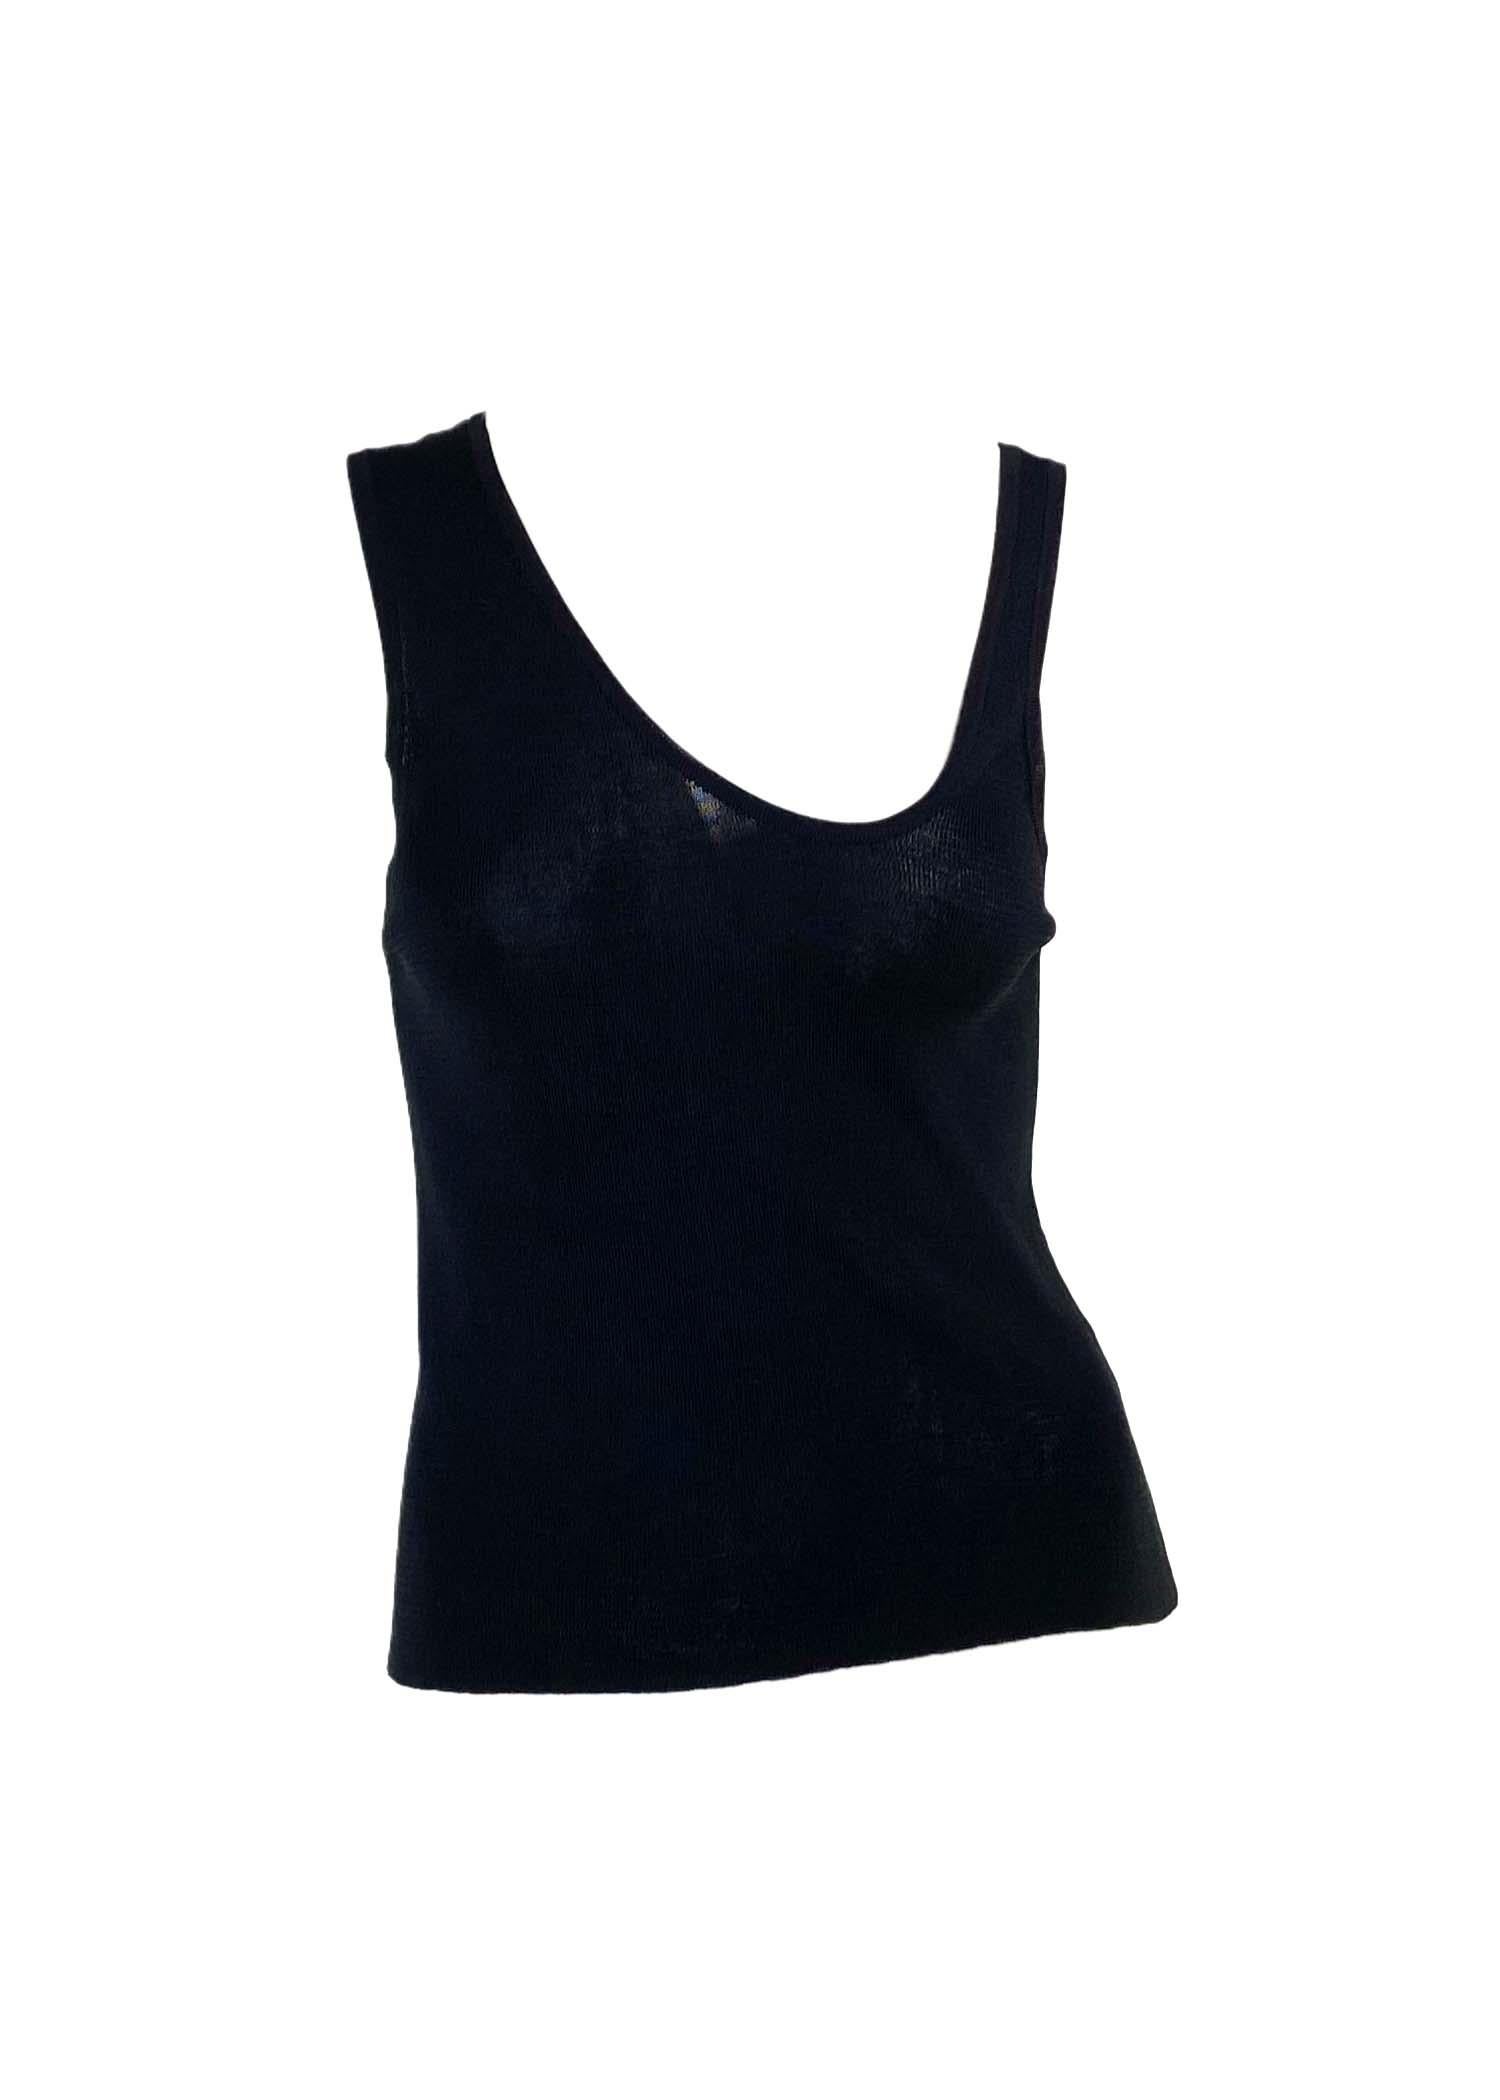 TheRealList presents: an asymmetric Gucci tank top, designed by Tom Ford. This uniquely shaped tank top features an asymmetrical design with a deep neckline. Not your average tank top, this shirt was designed for the Spring/Summer 1998 collection